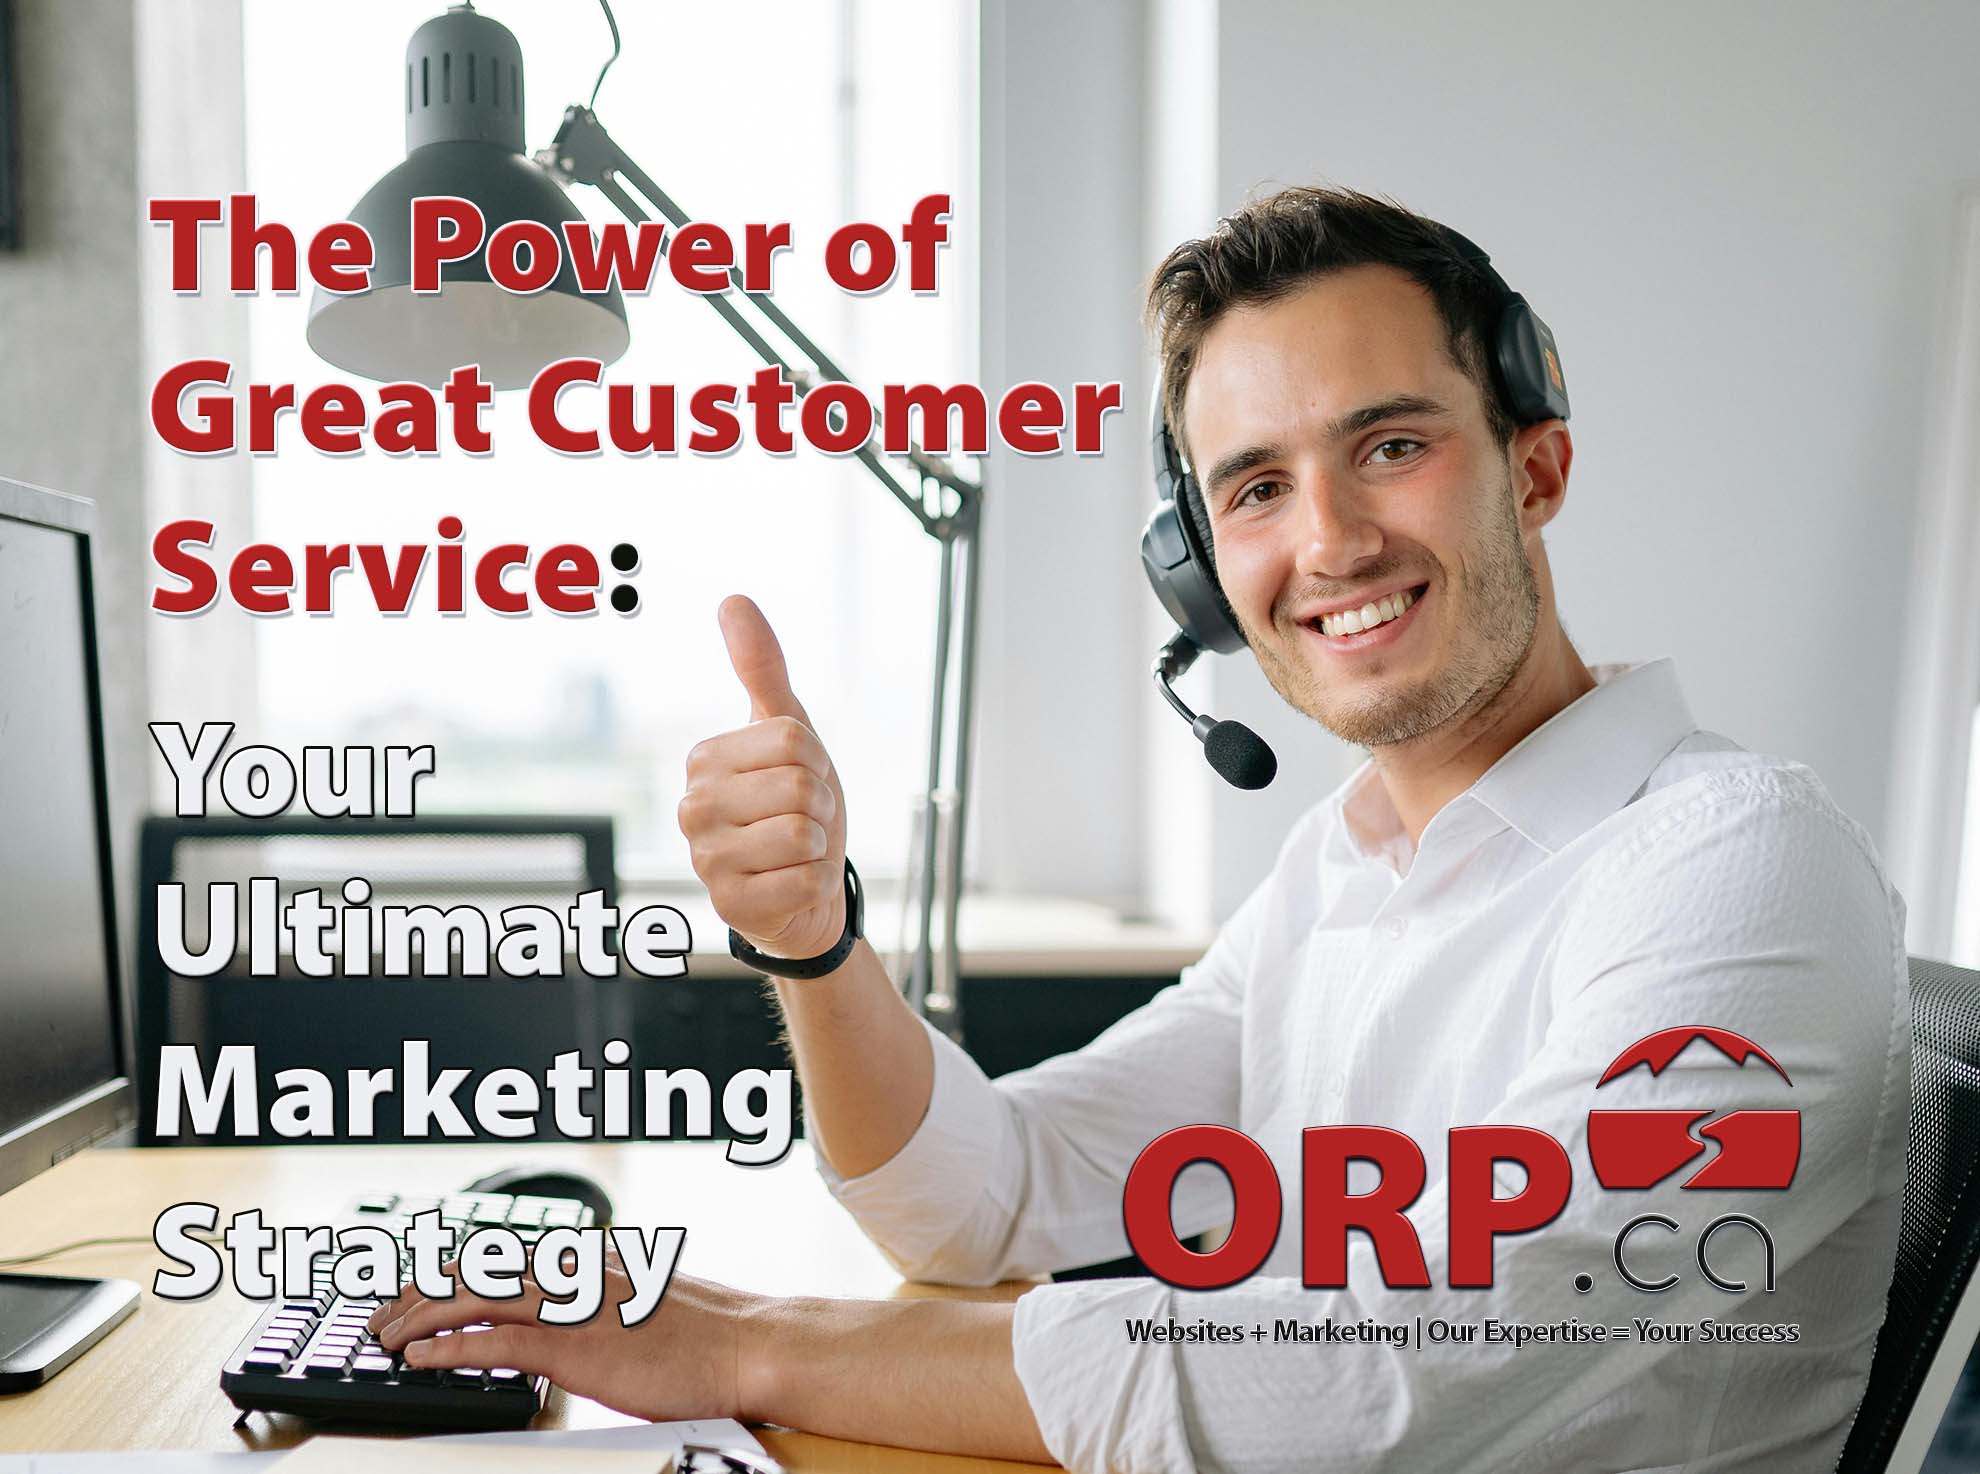 The Power of Great Customer Service: Your Ultimate Small Business Marketing Strategy and Key to Customer Retention a small business digital marketing article from ORP.ca - Website design and support, digital marketing and consulting services.